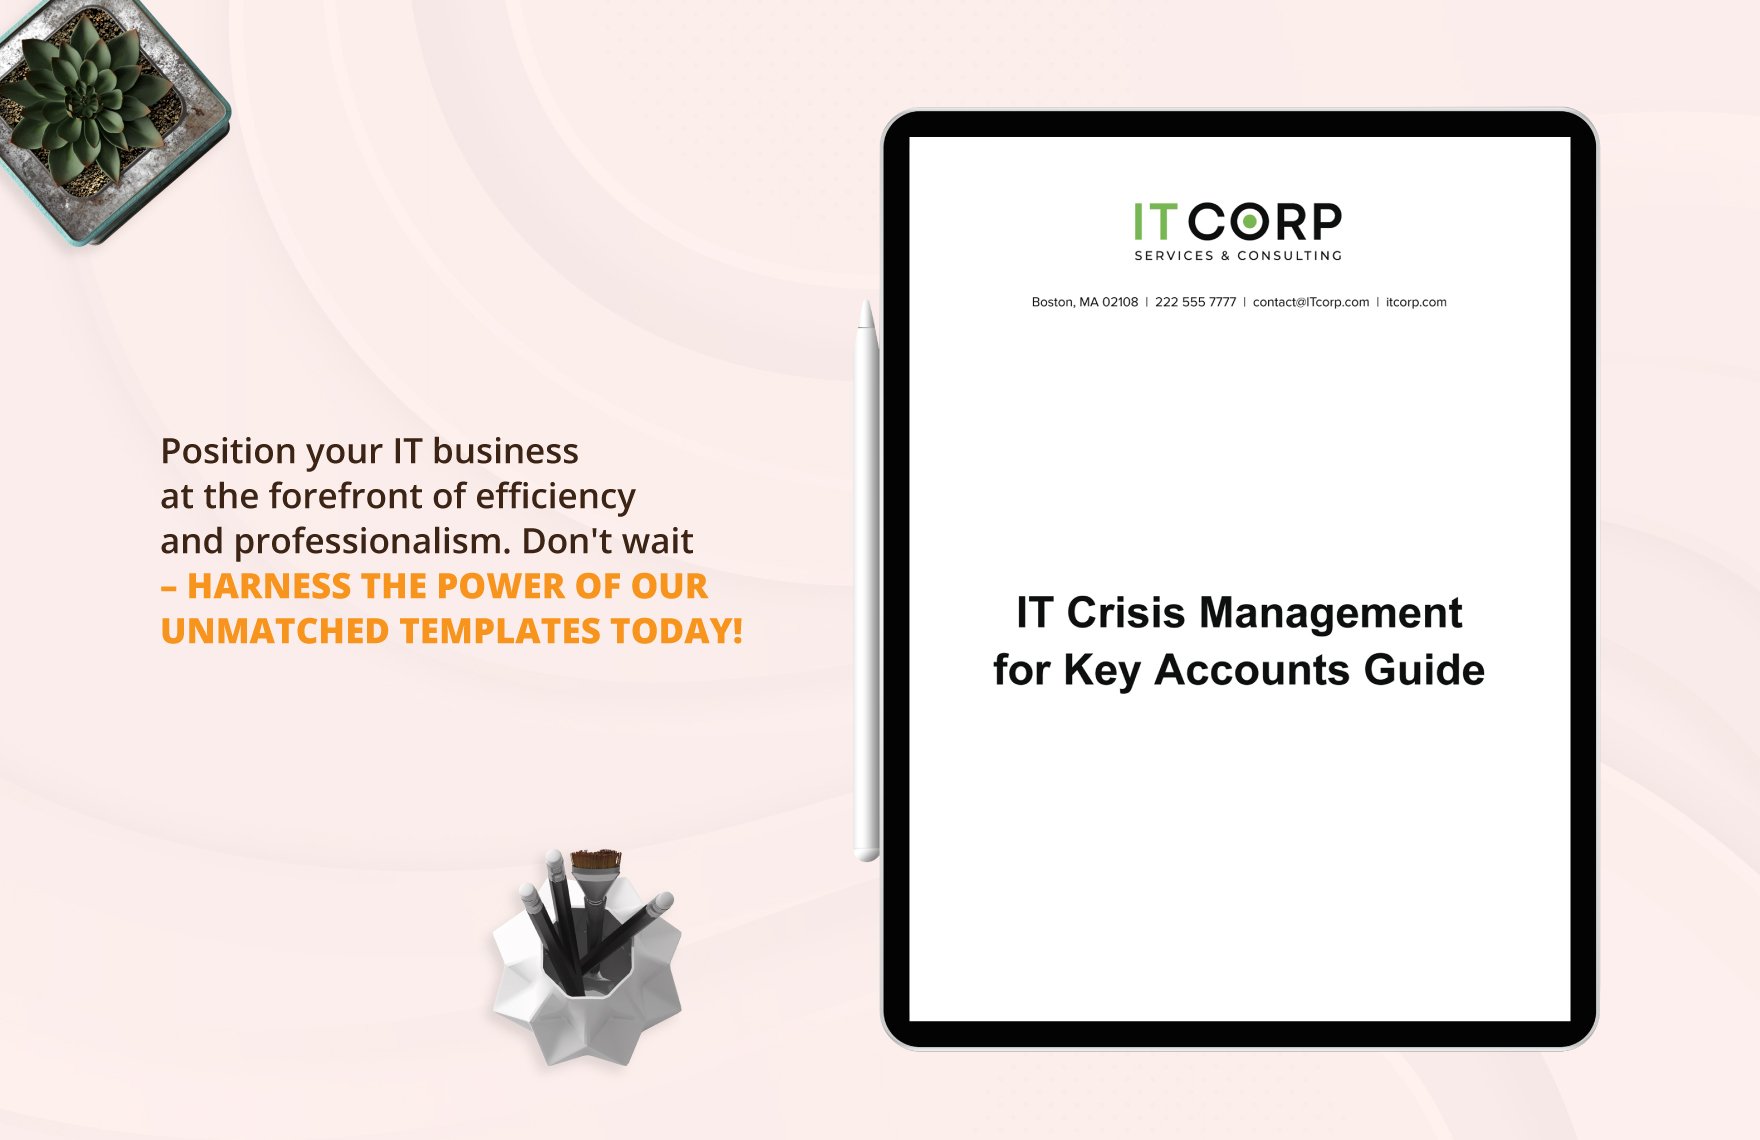 IT Crisis Management for Key Accounts Guide Template